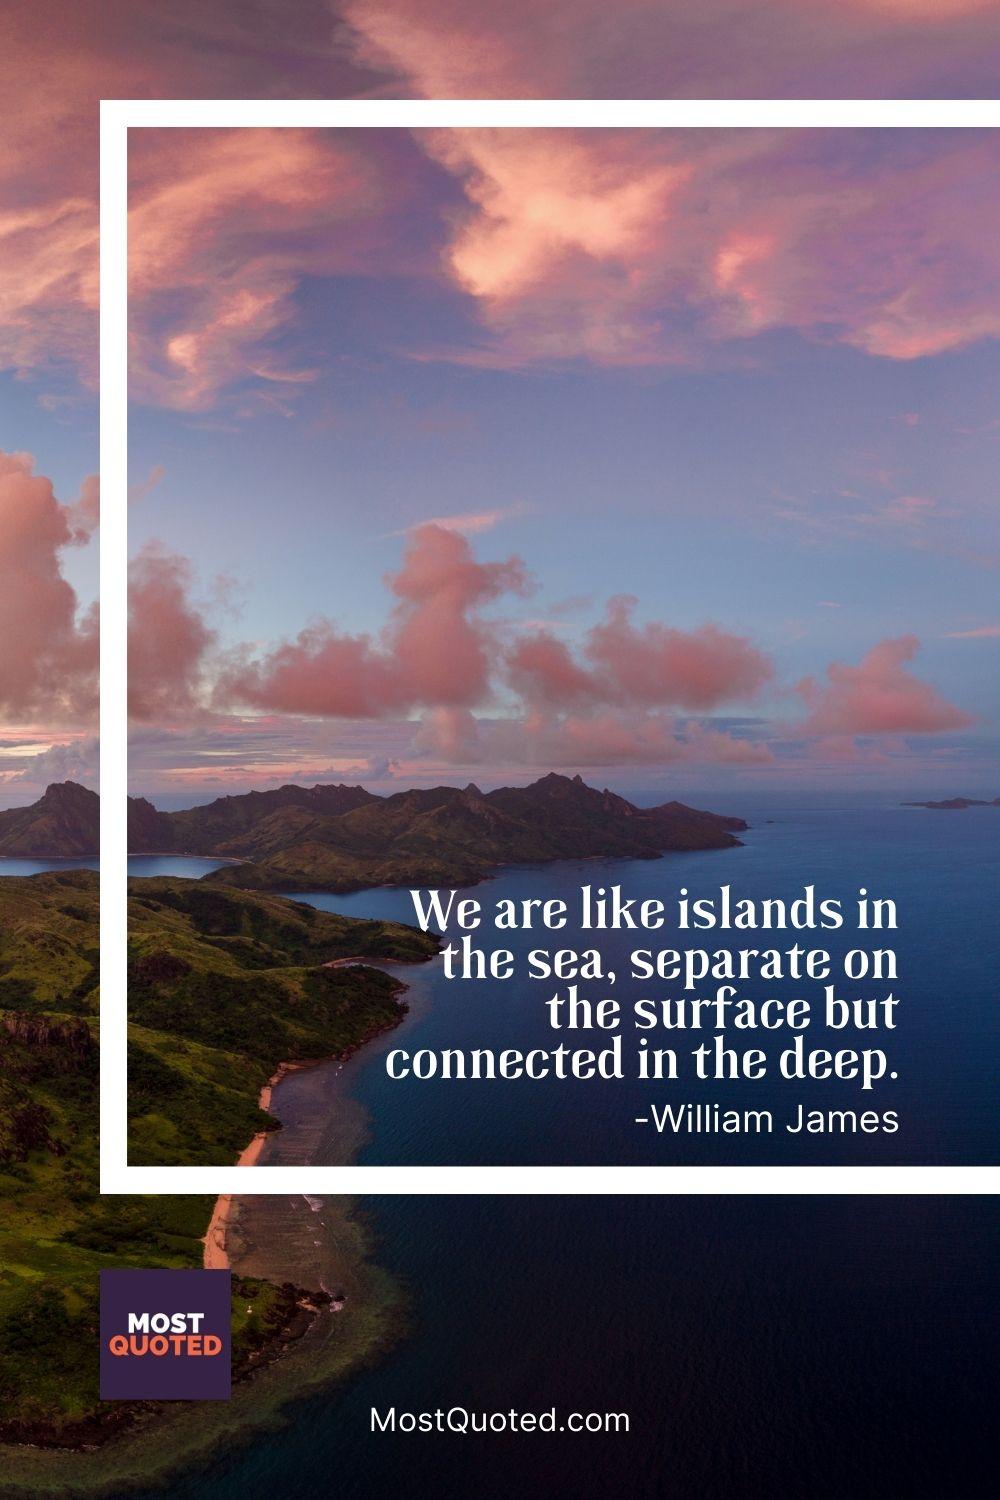 We are like islands in the sea, separate on the surface but connected in the deep. - William James